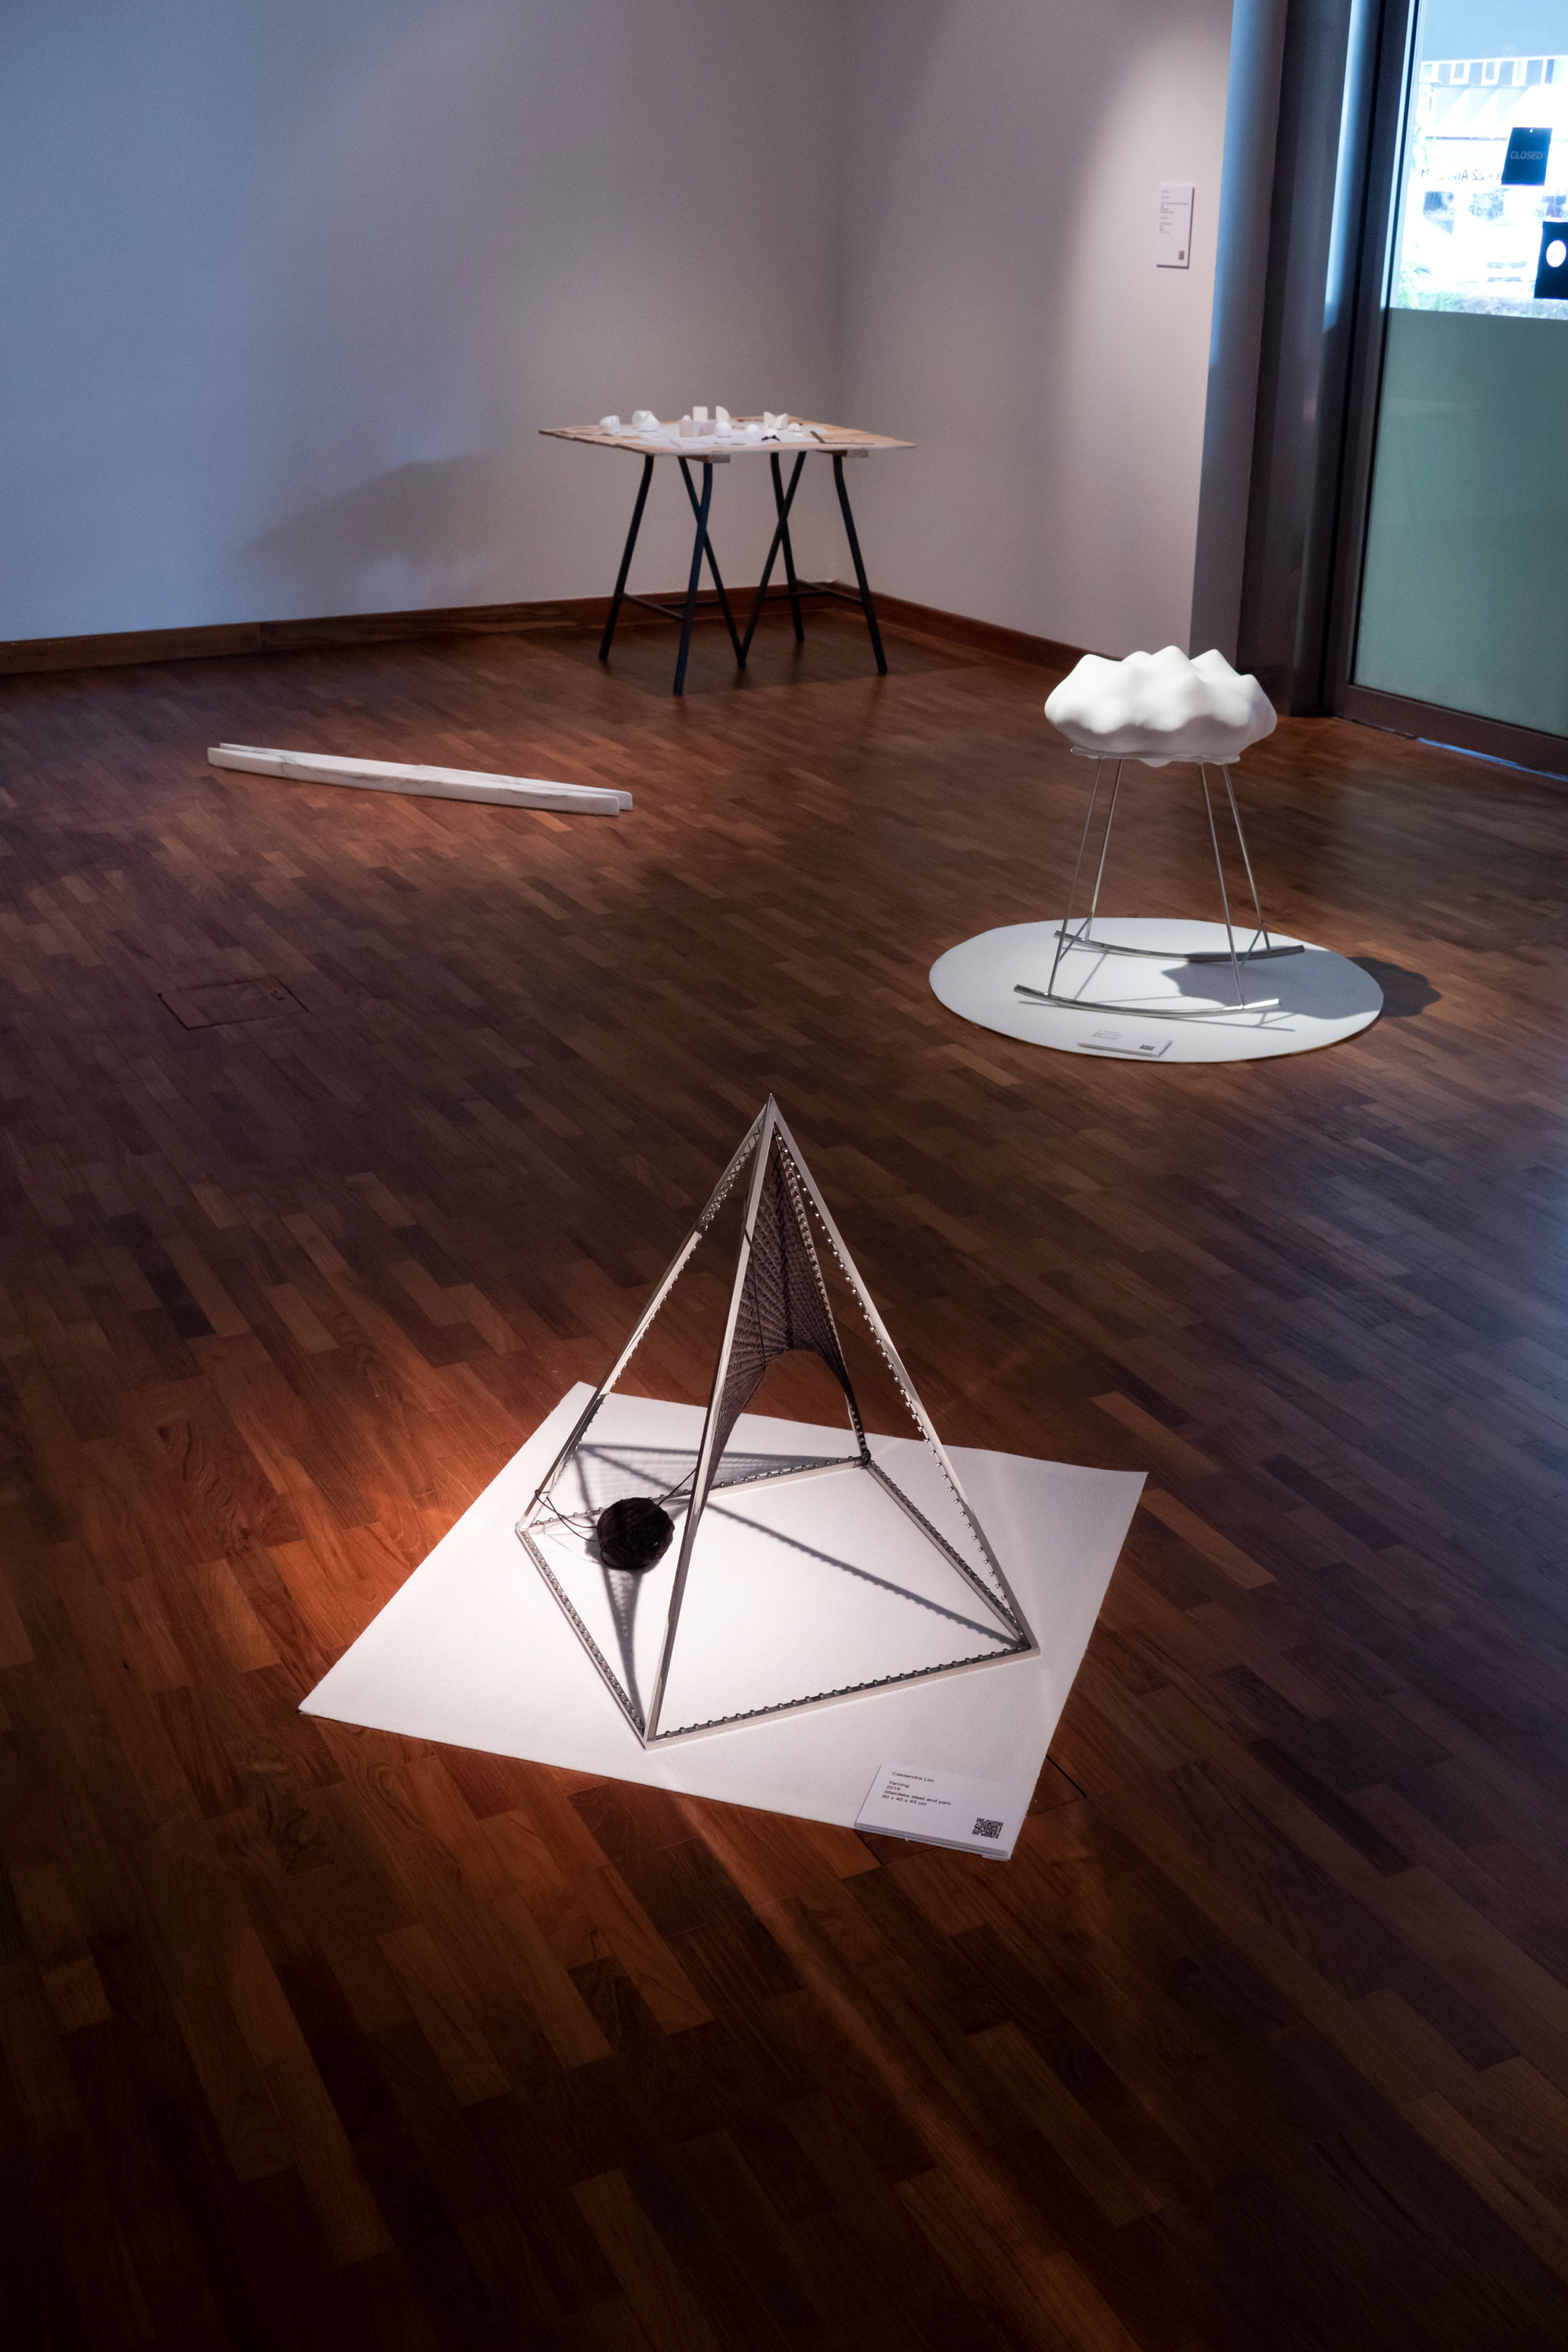 reTHINGing Materiality Exhibition at Lim Hak Tai Gallery